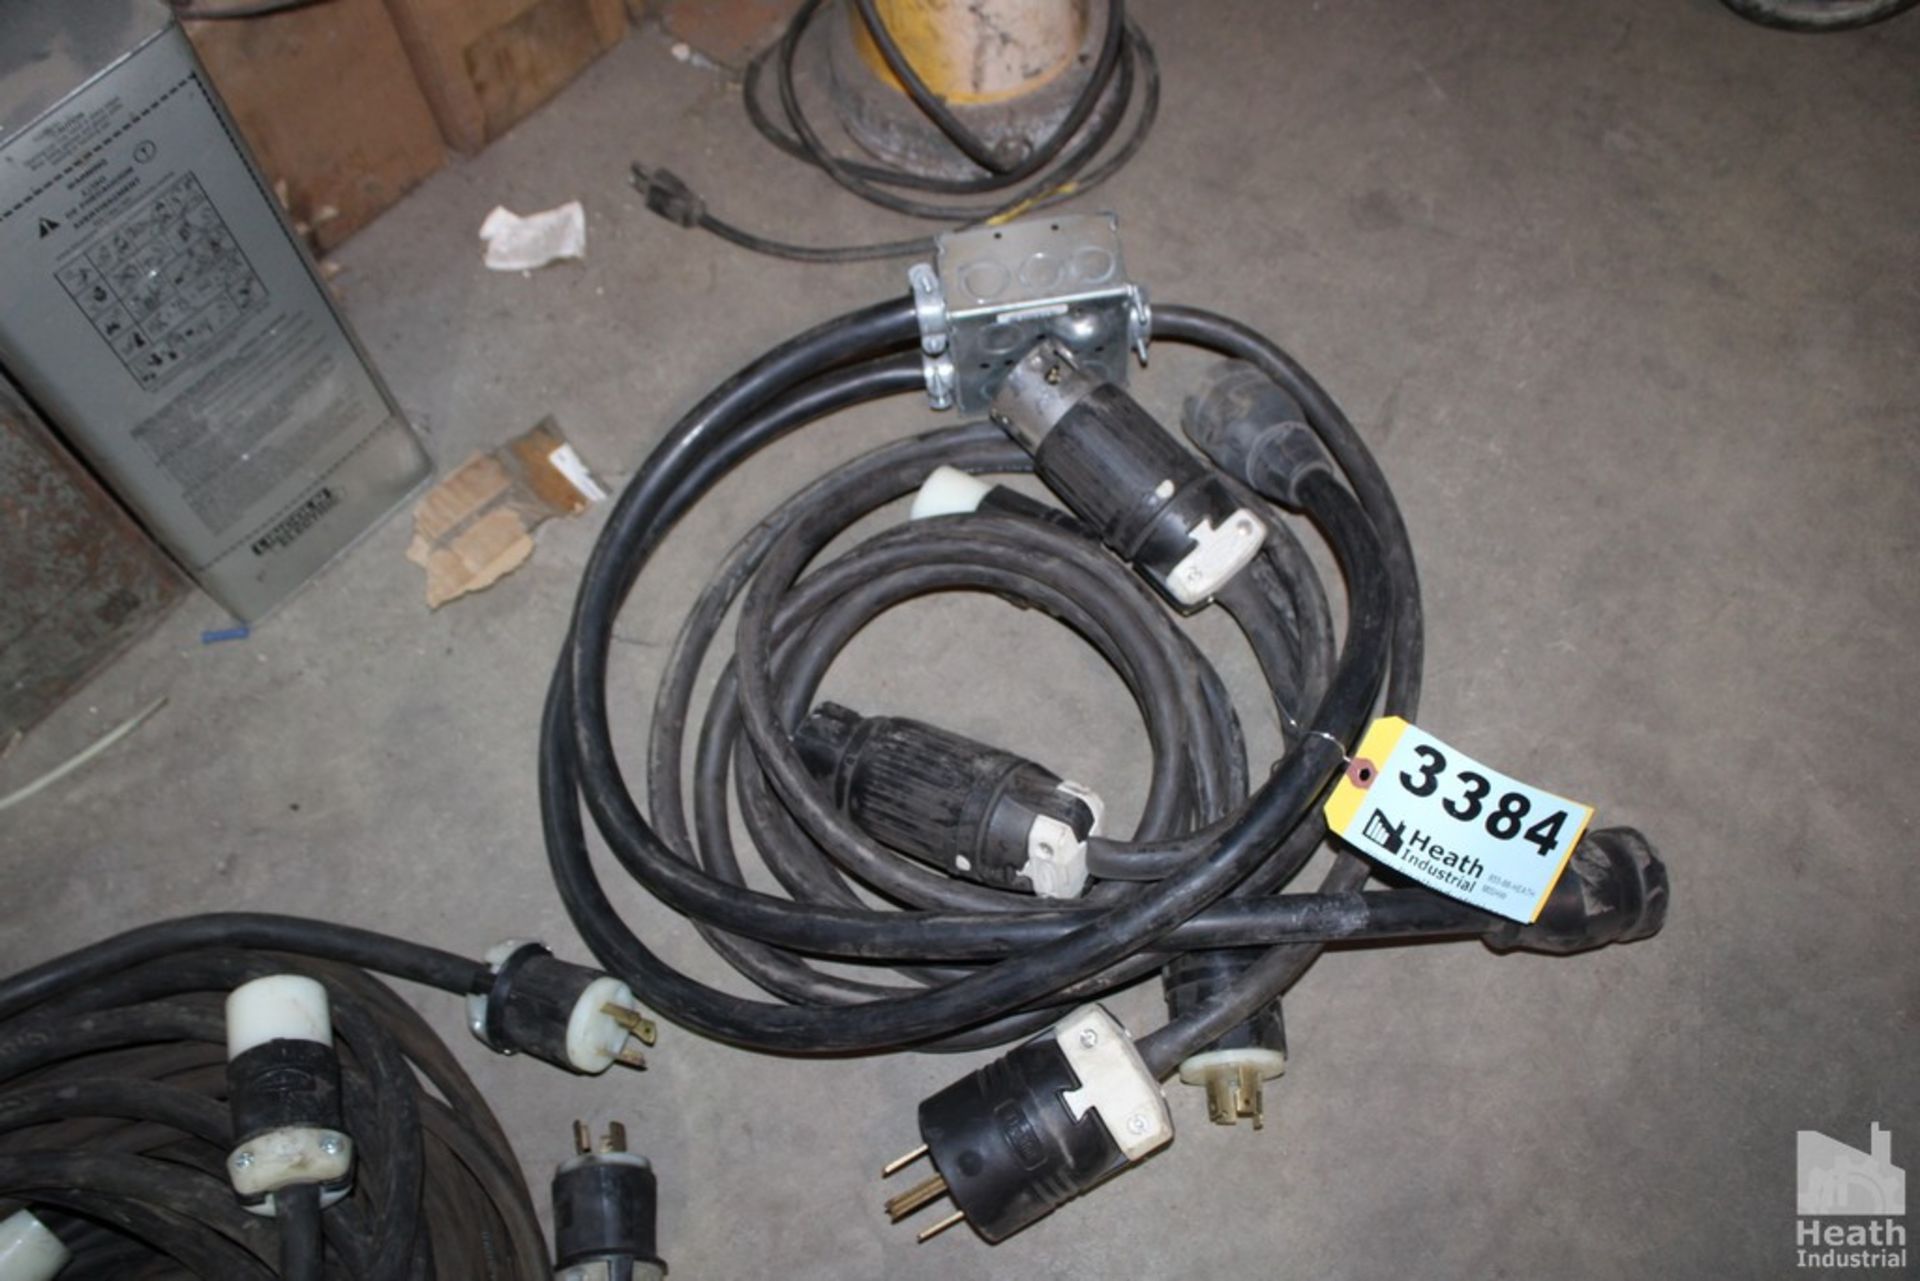 HEAVY DUTY EXTENSION CORDS AND ADAPTER